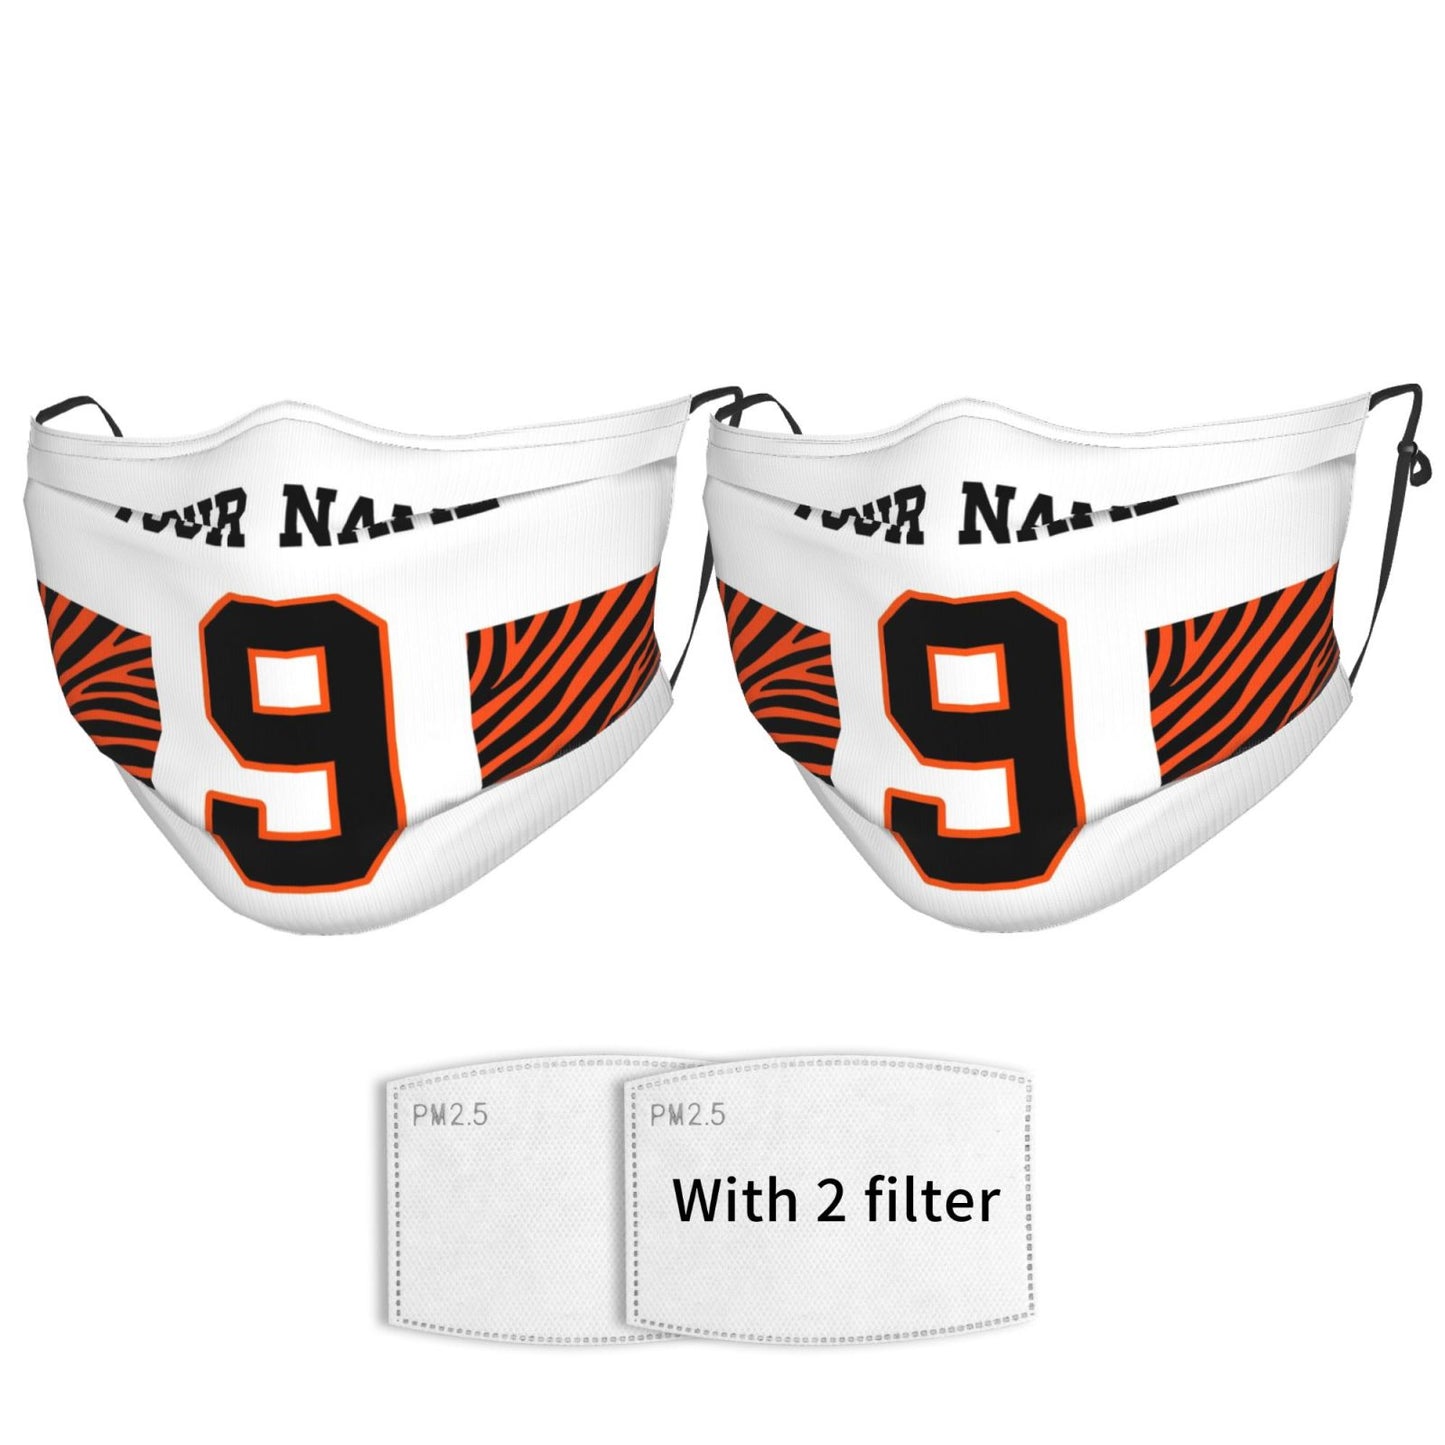 2-Pack Cincinnati Bengals Face Covering Football Team Decorative Adult Face Mask With Filters PM 2.5 White